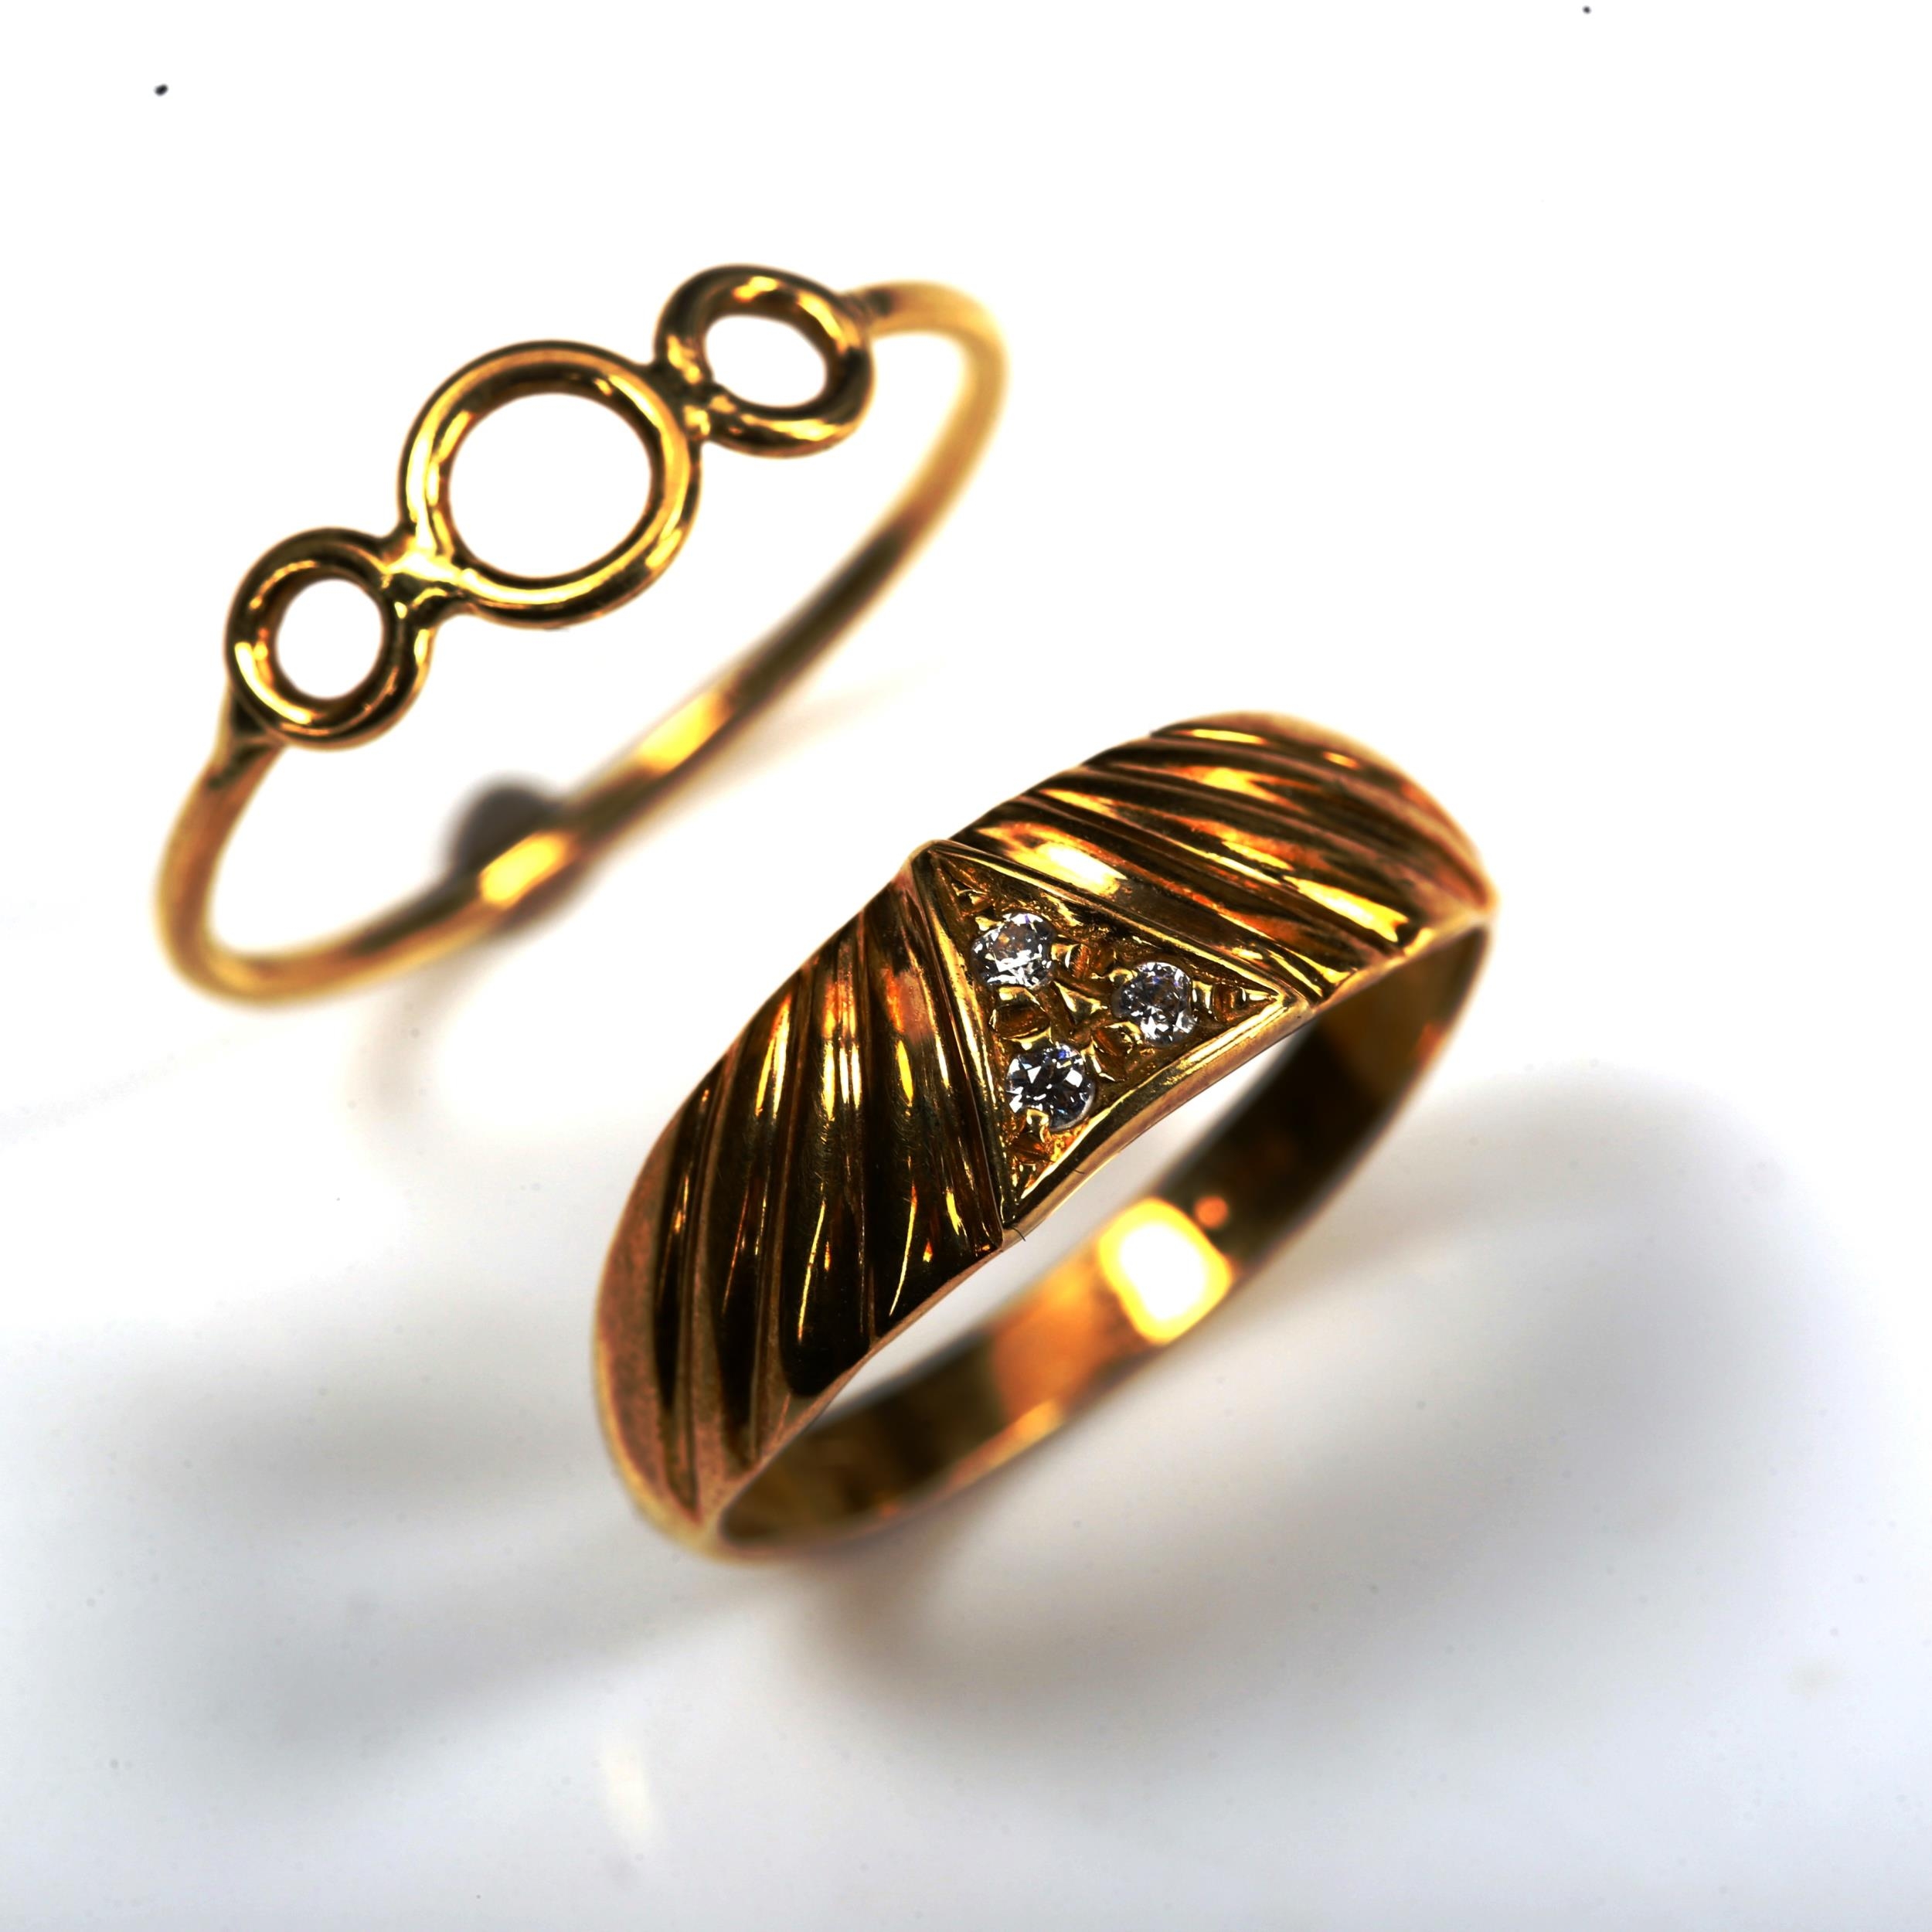 2 Continental 18ct gold rings, both size L, 3g total (2) No damage or repairs, marks slightly